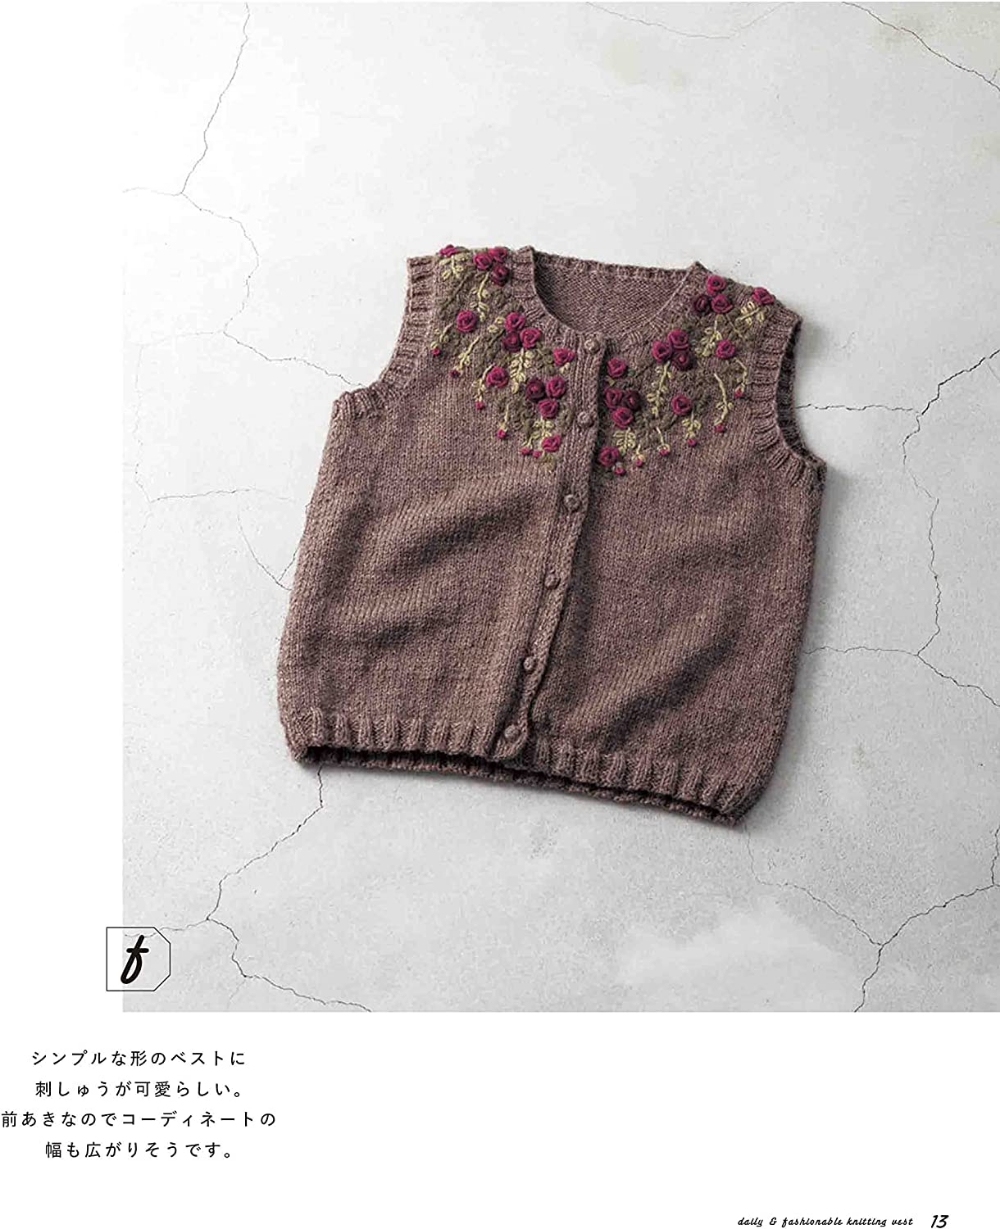 Fashionable everyday wear vest knitted with needles (applemints)